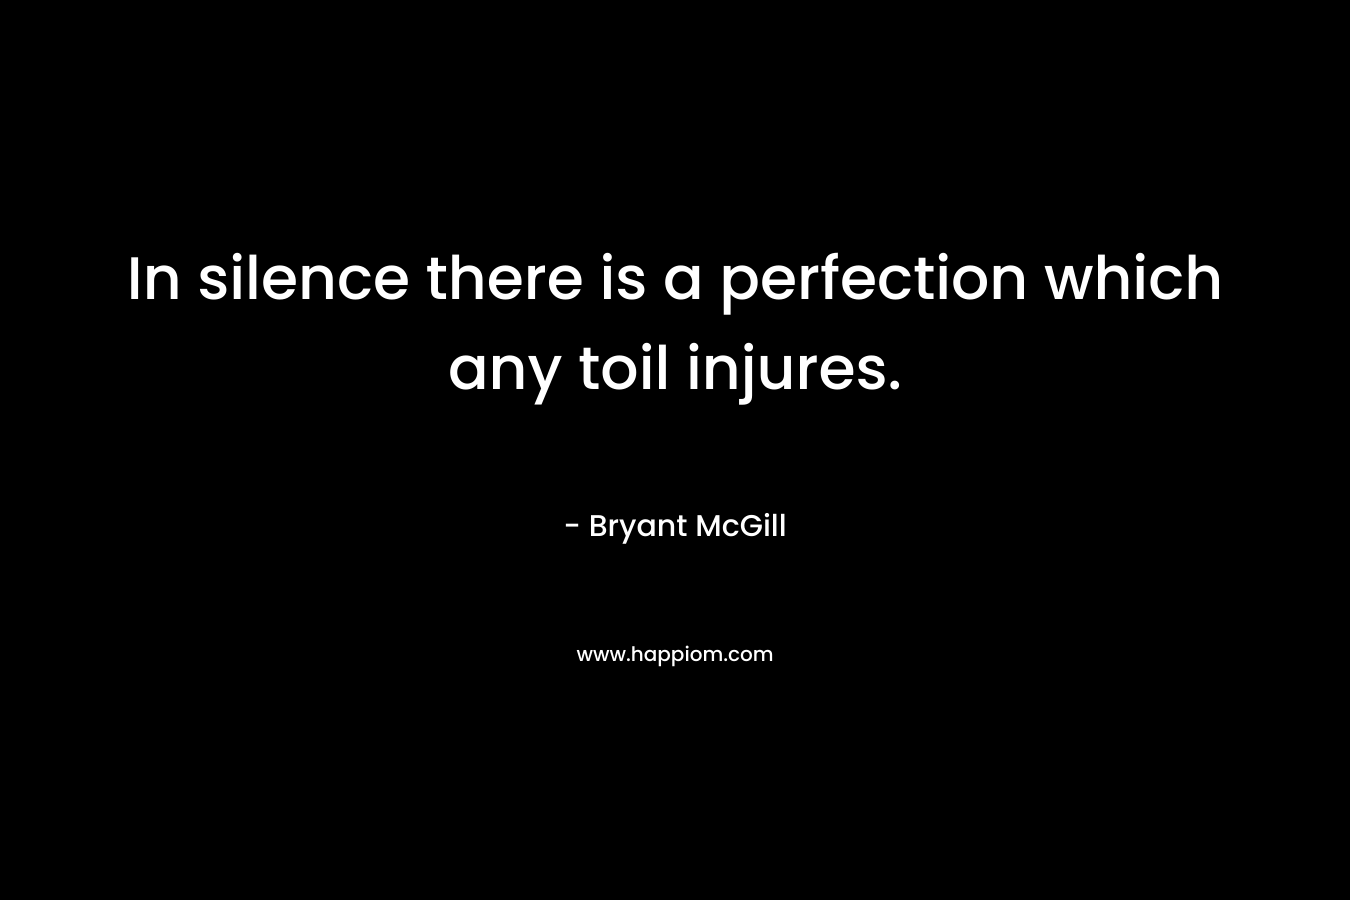 In silence there is a perfection which any toil injures. – Bryant McGill